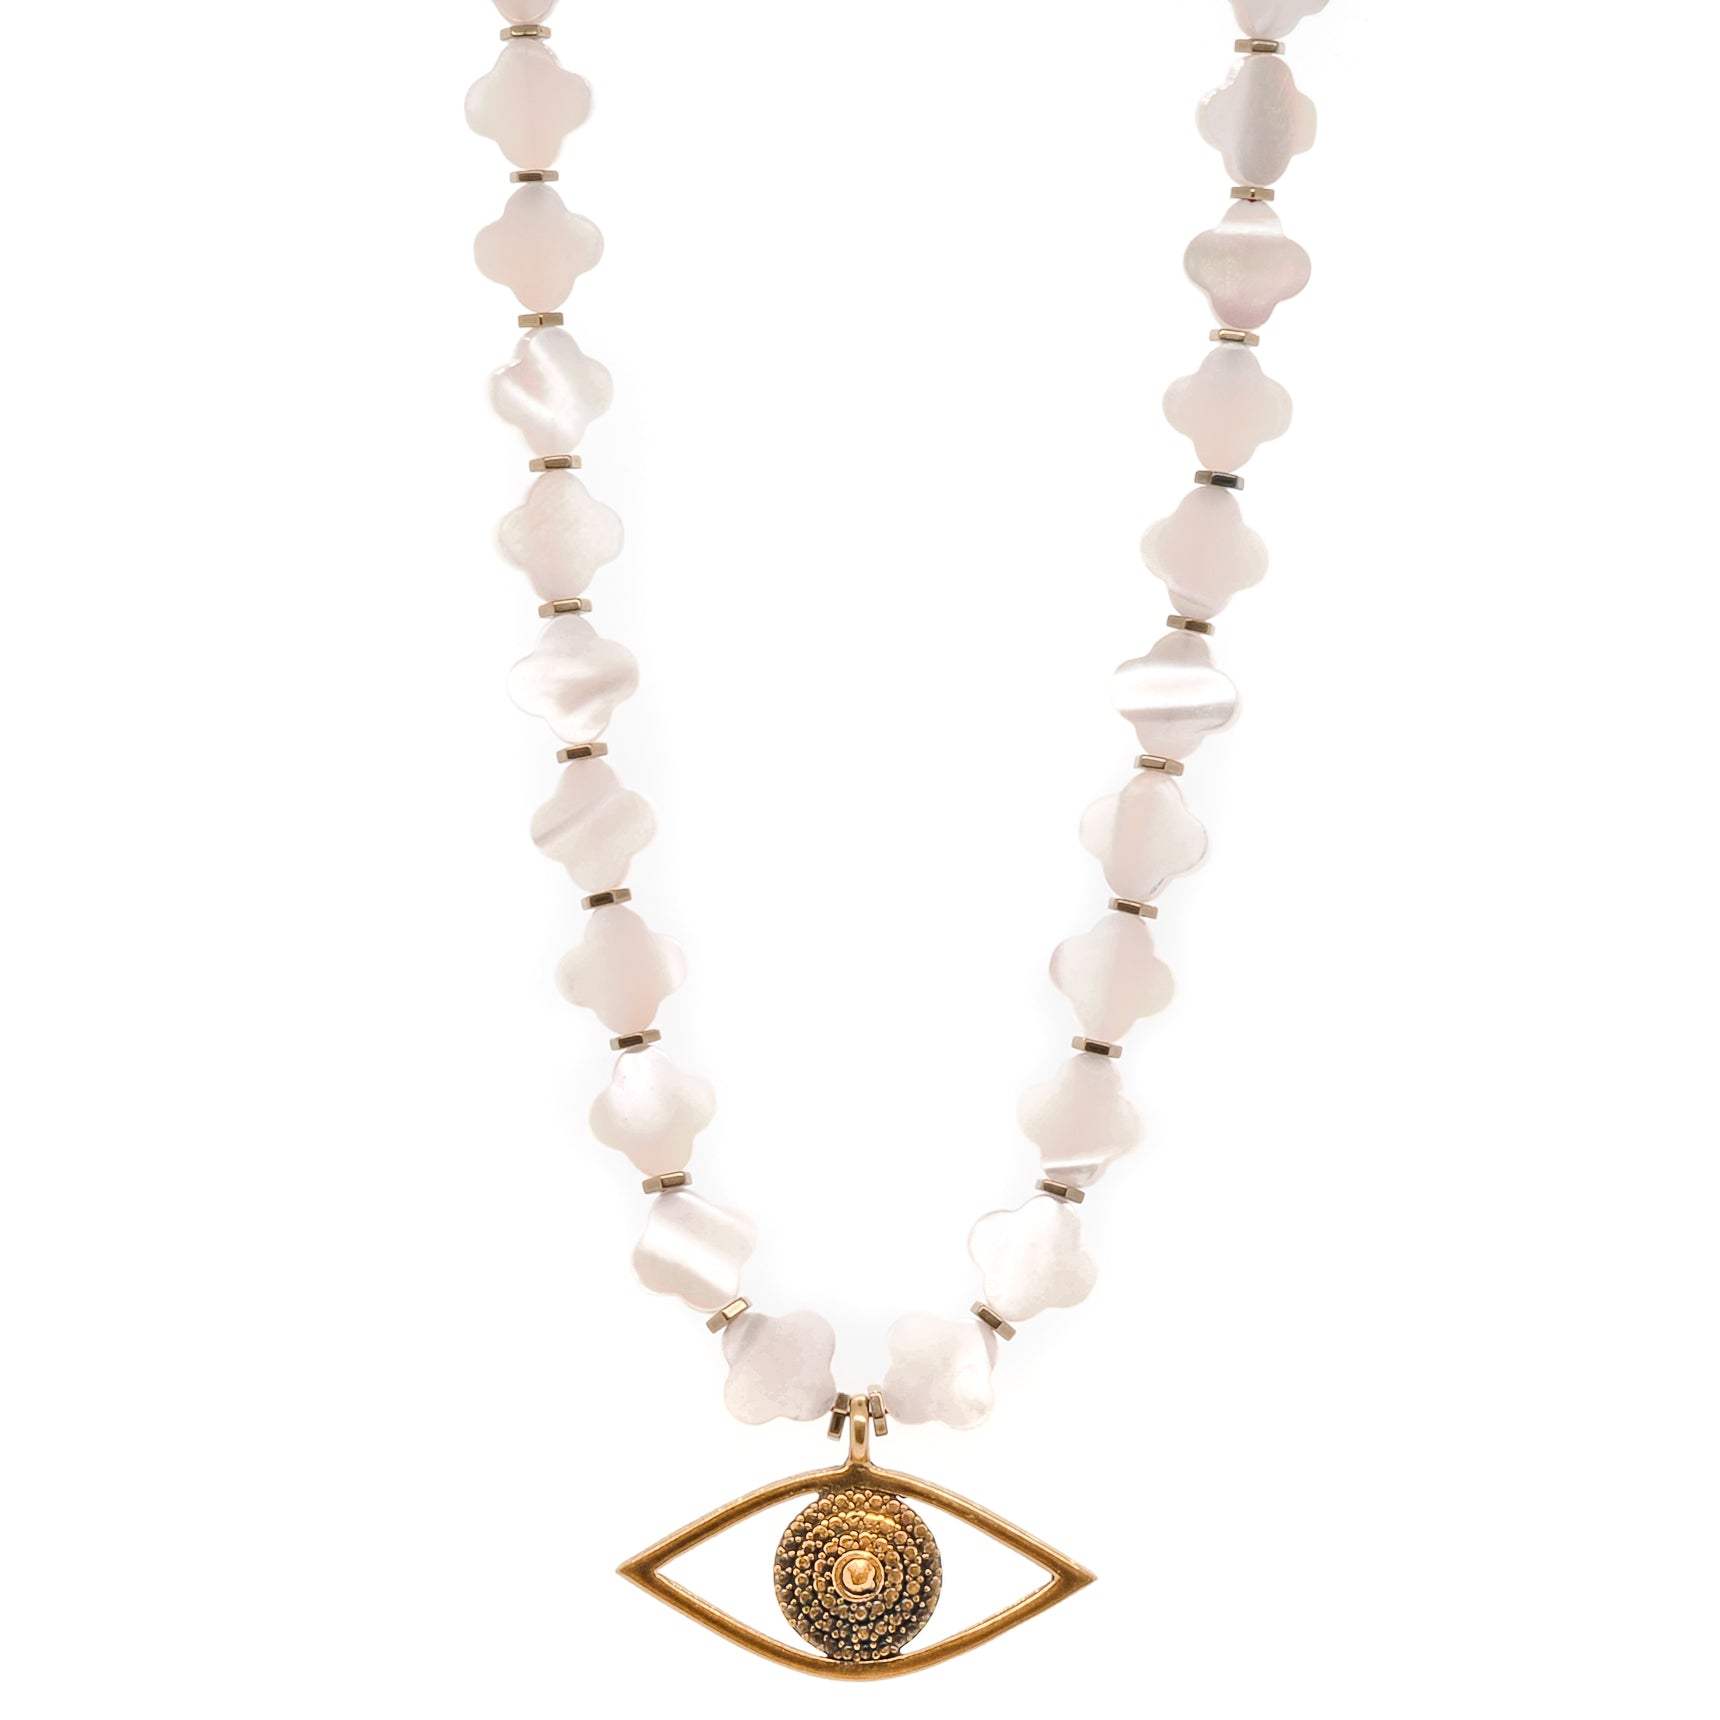 Alhambra Evil Eye Choker Necklace with beautiful pearl Alhambra flower beads and stunning gold plated Evil Eye Pendant for protection and good luck.